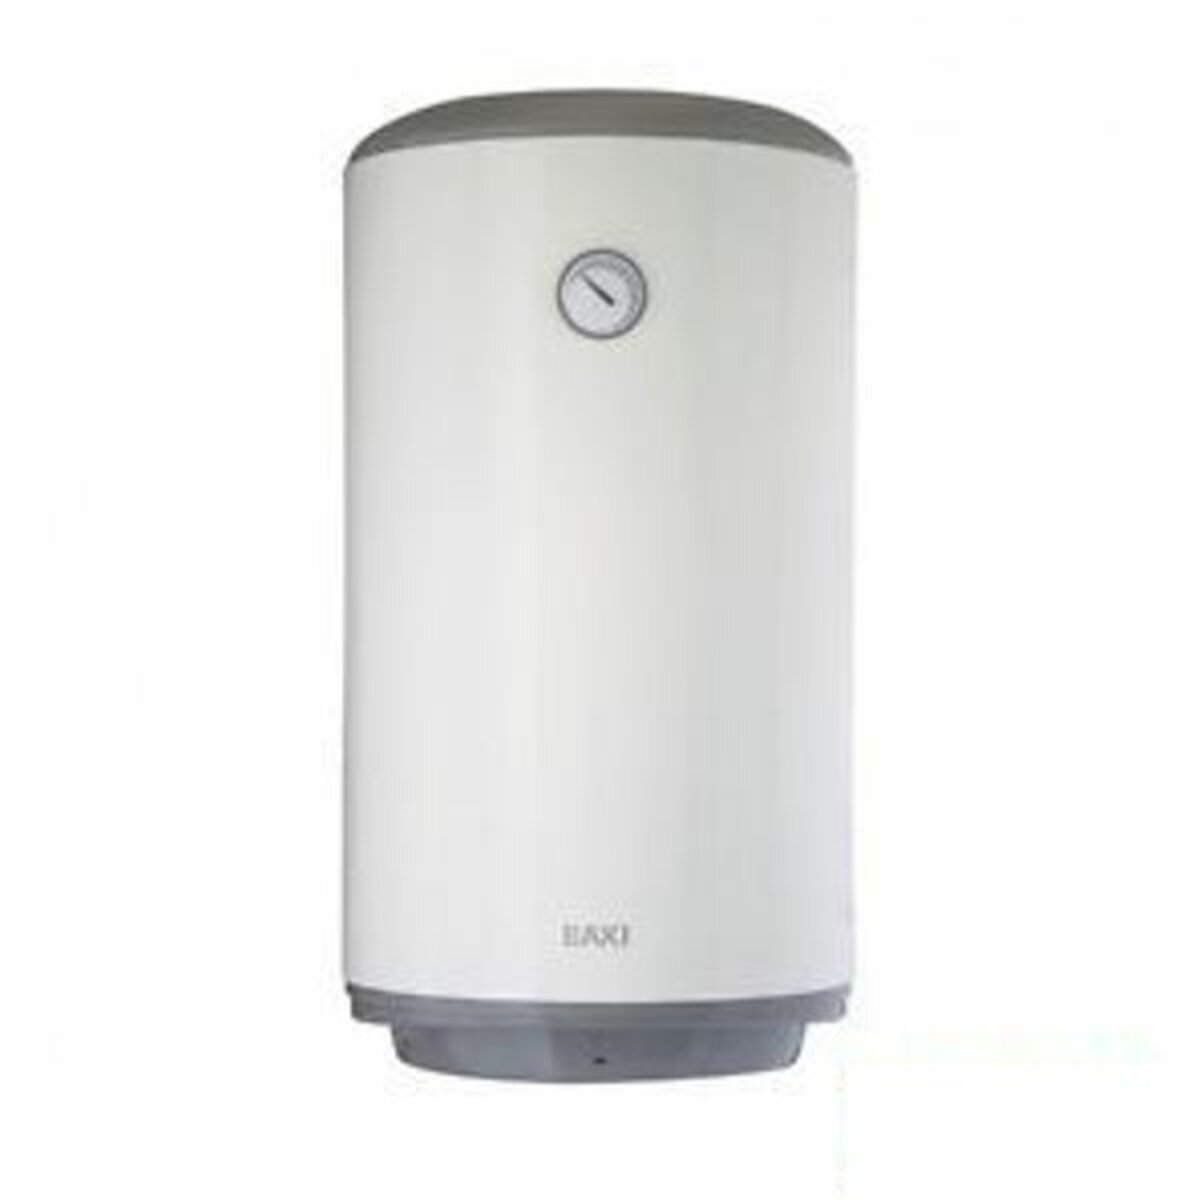 Electric water heater Must + line Baxi v580 80 liters 5 years